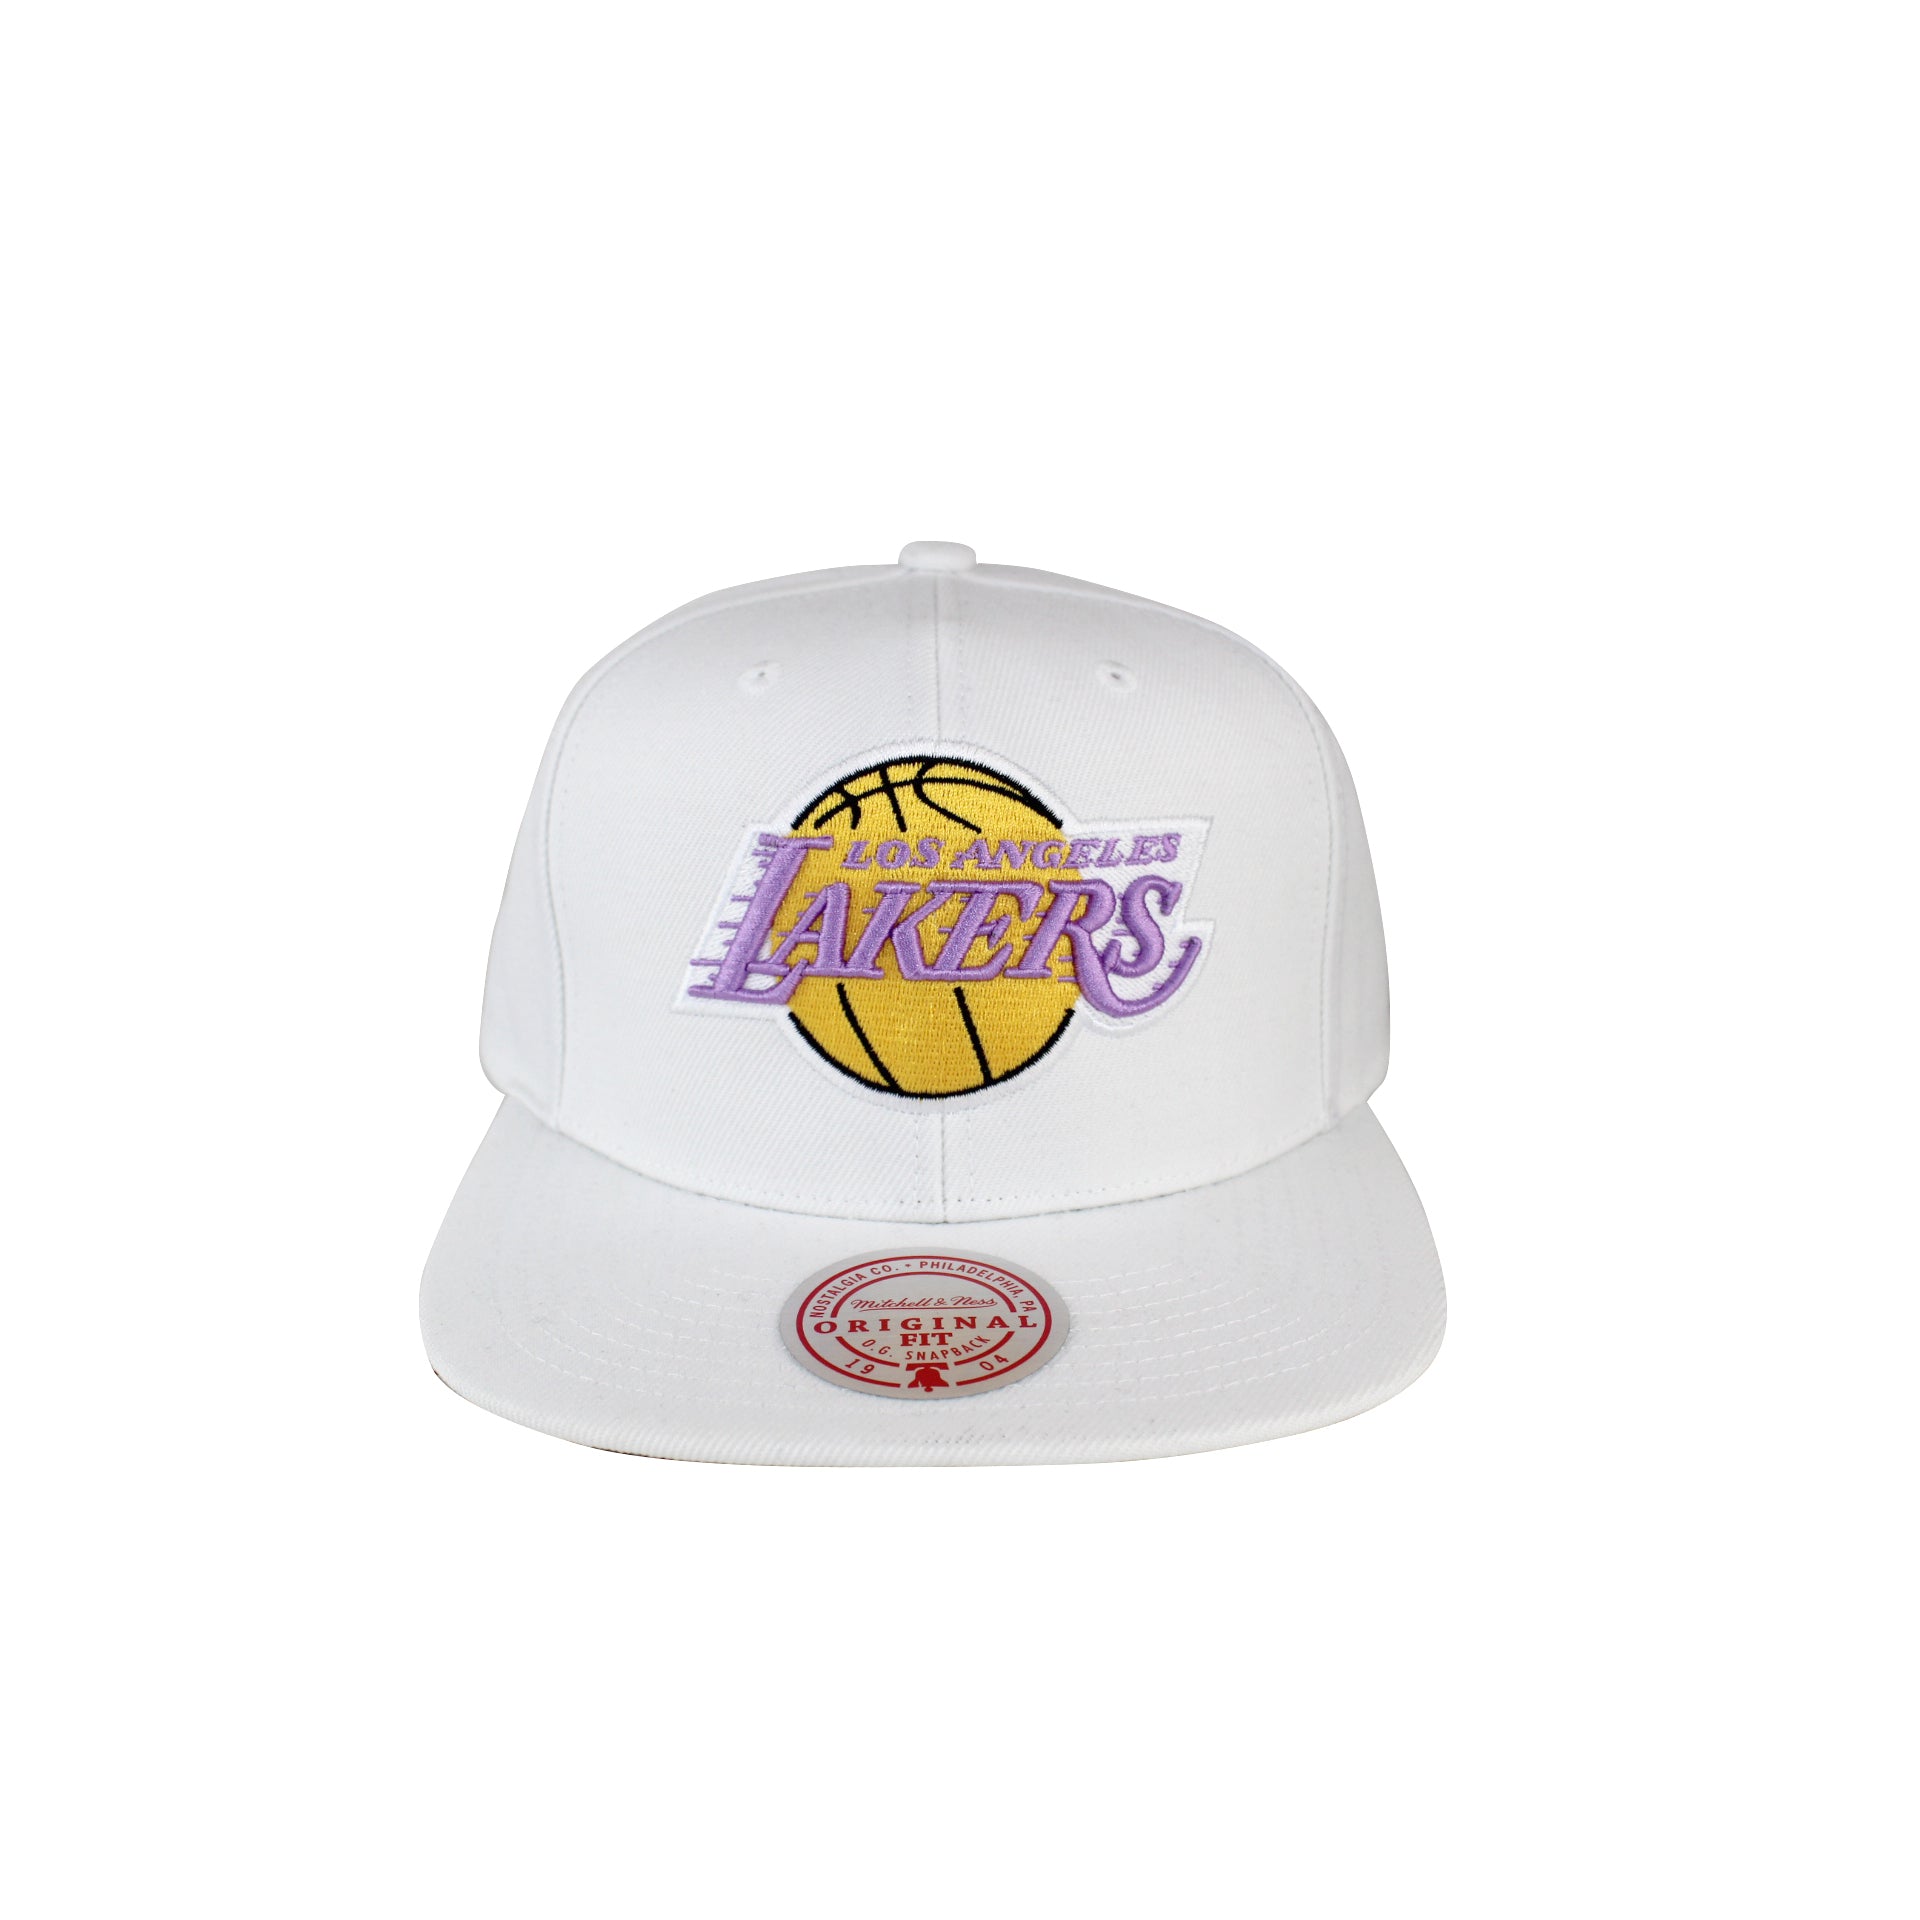 Mitchell & Ness NBA Los Angeles Lakers Snapback Hat White